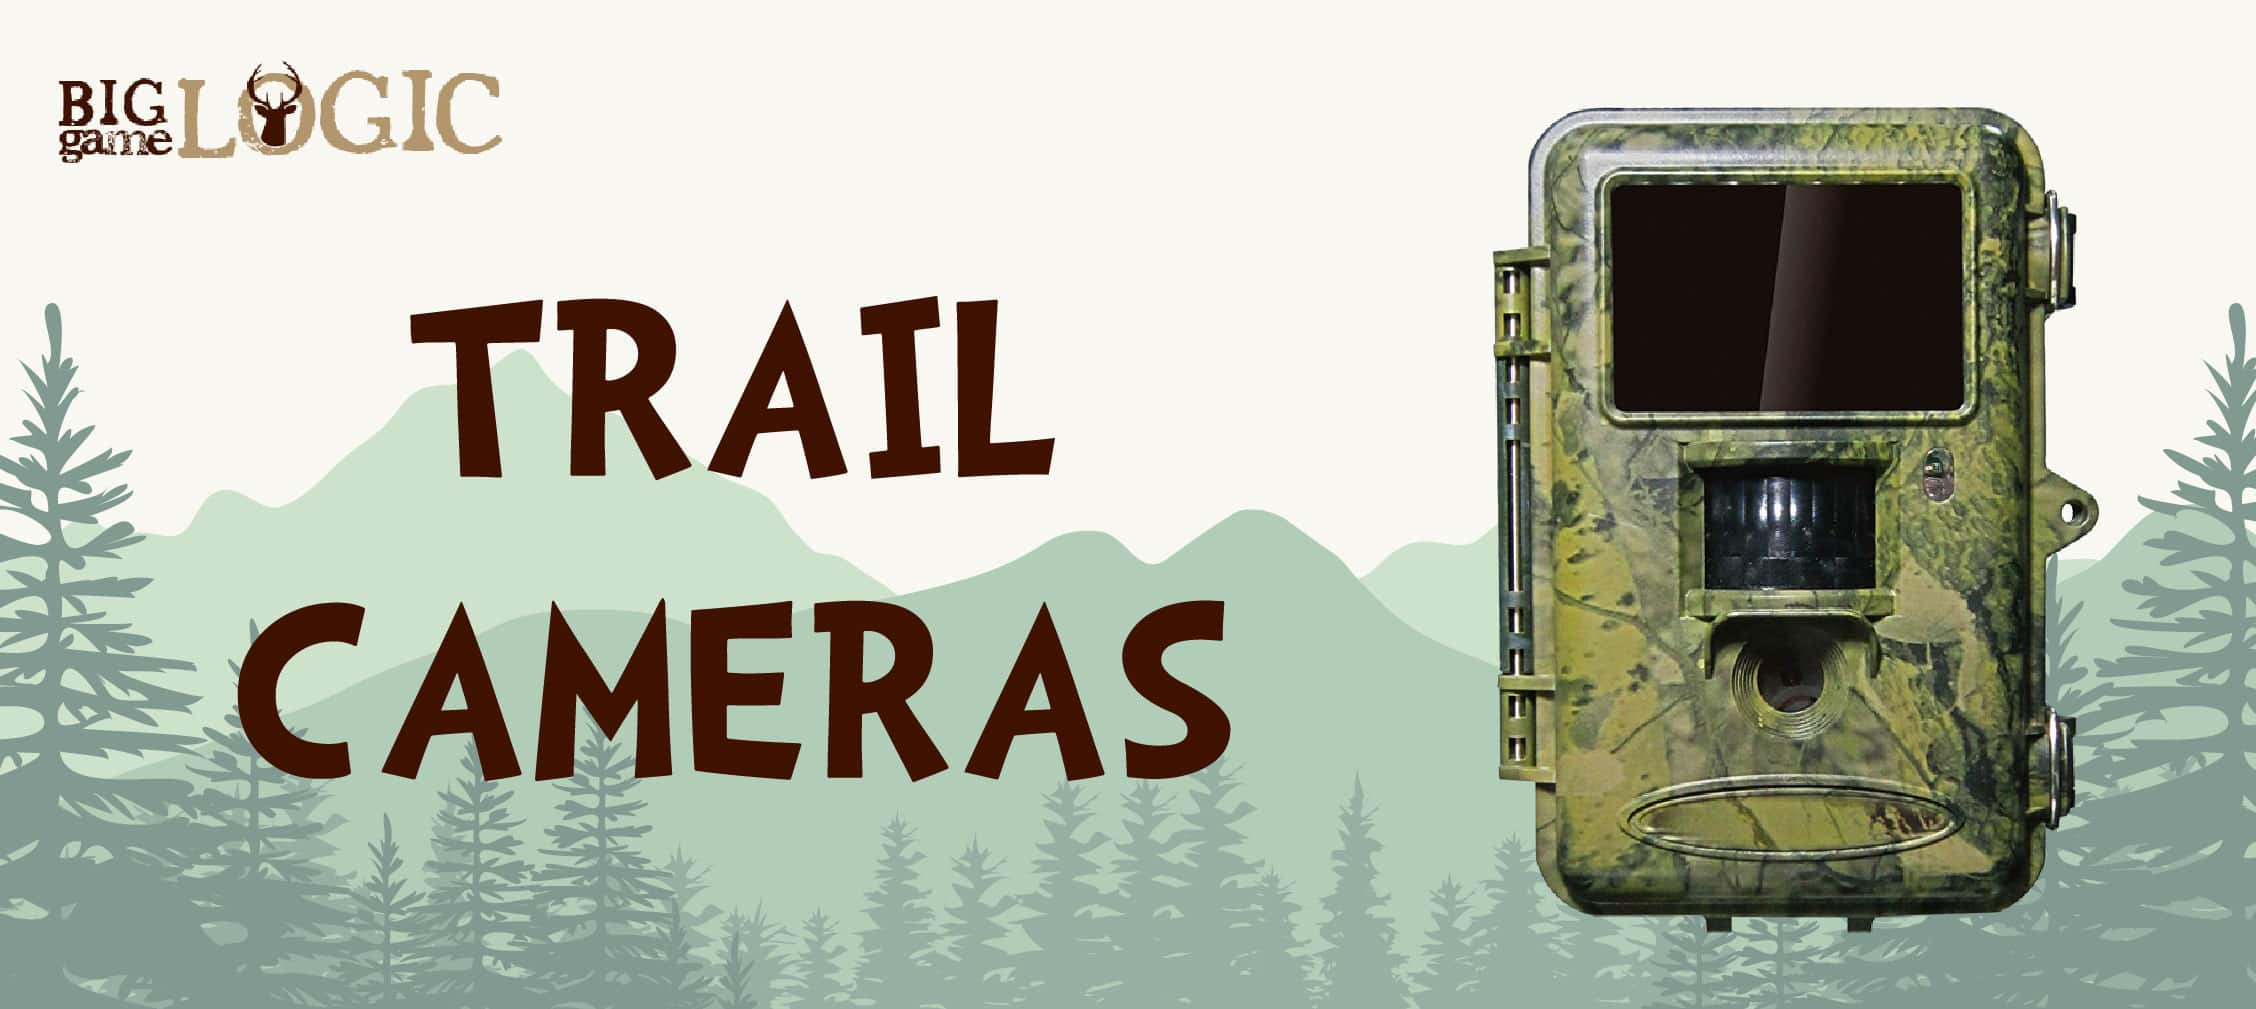 Browning Trail Cameras Comparison Chart